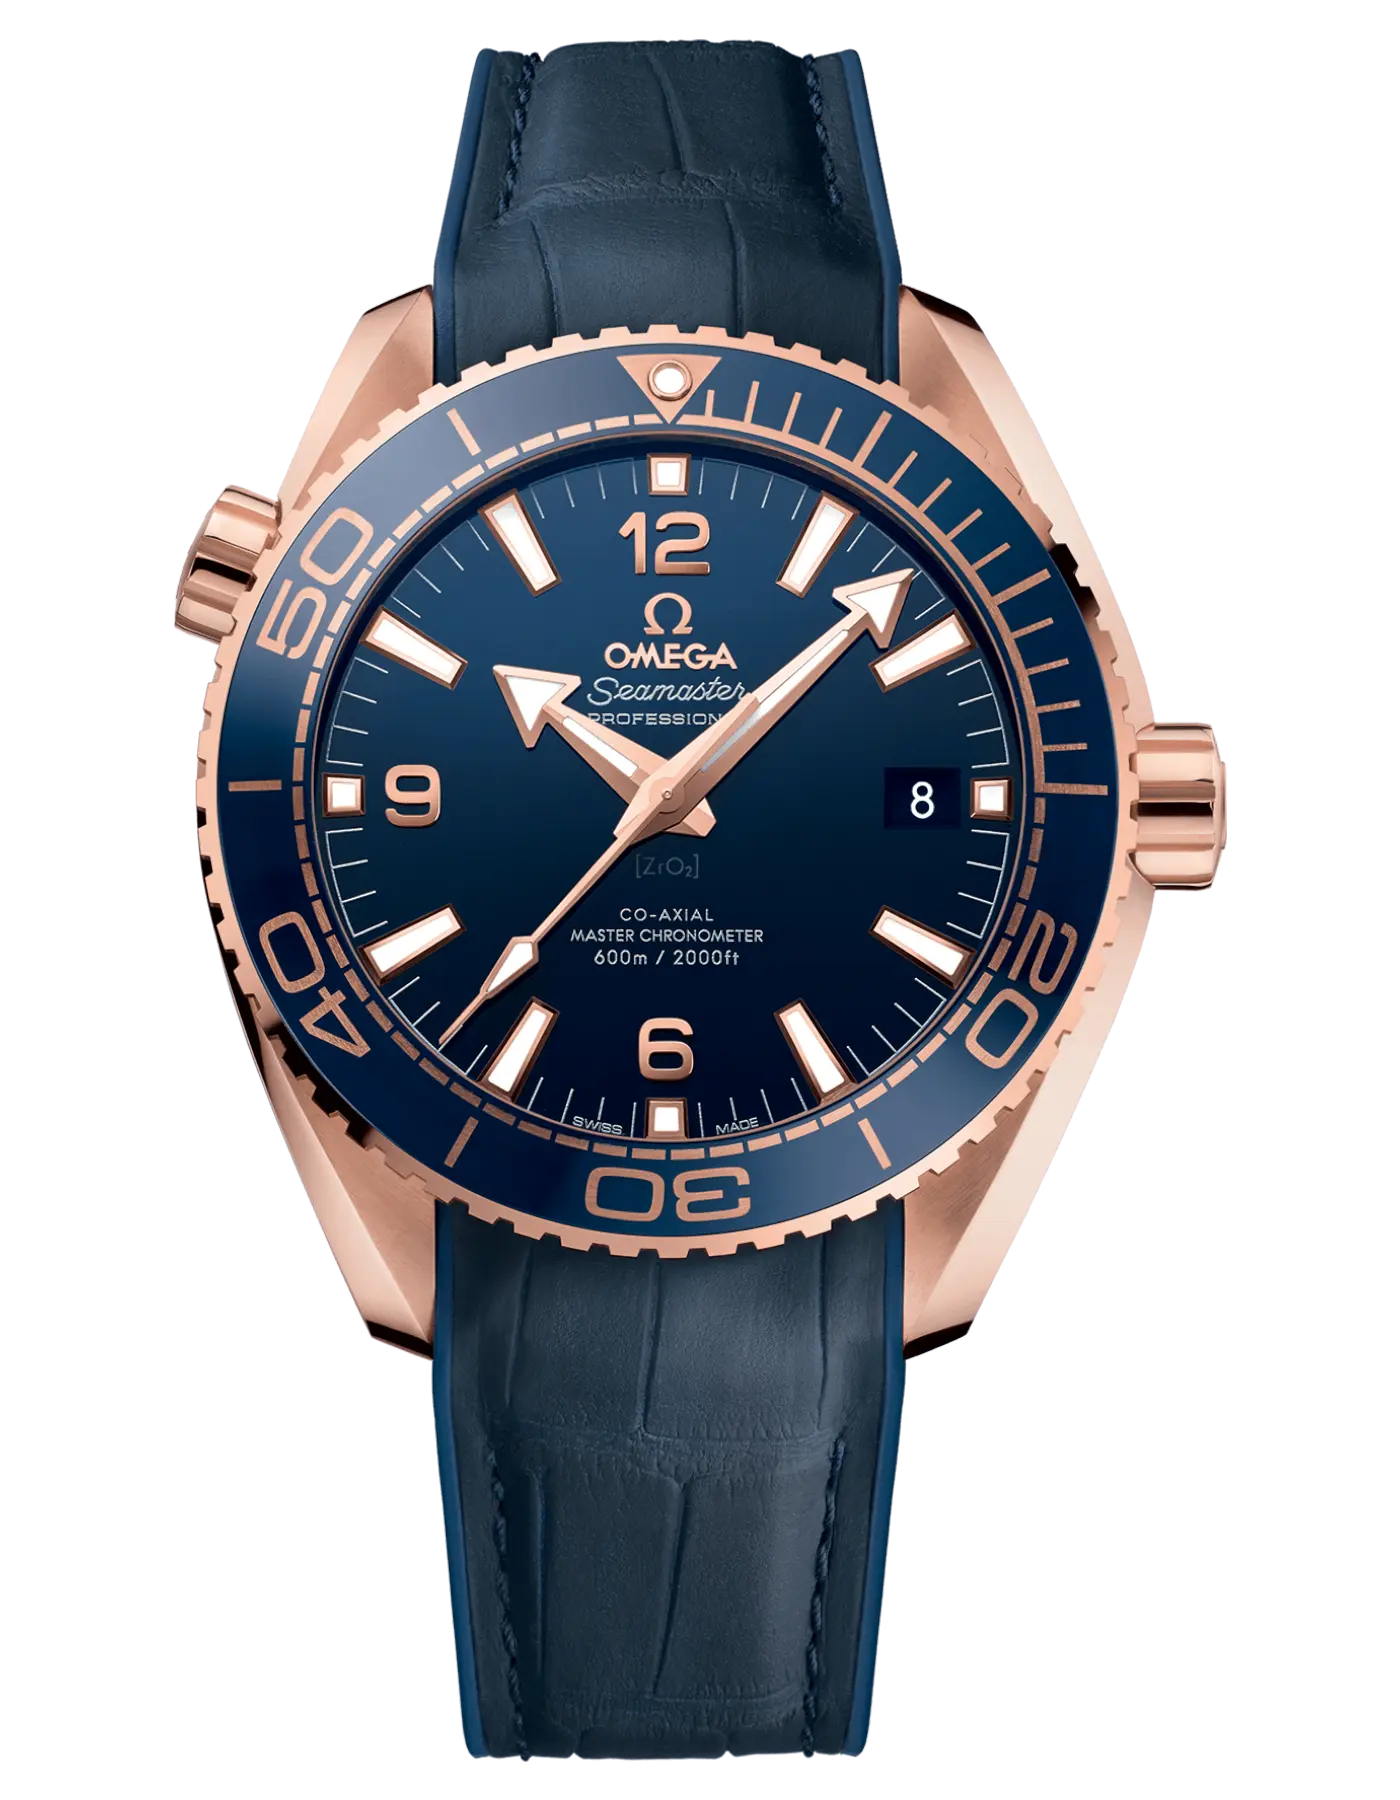 Seamaster Planet Ocean 600m Co-Axial Master Chronometer 43.5mm